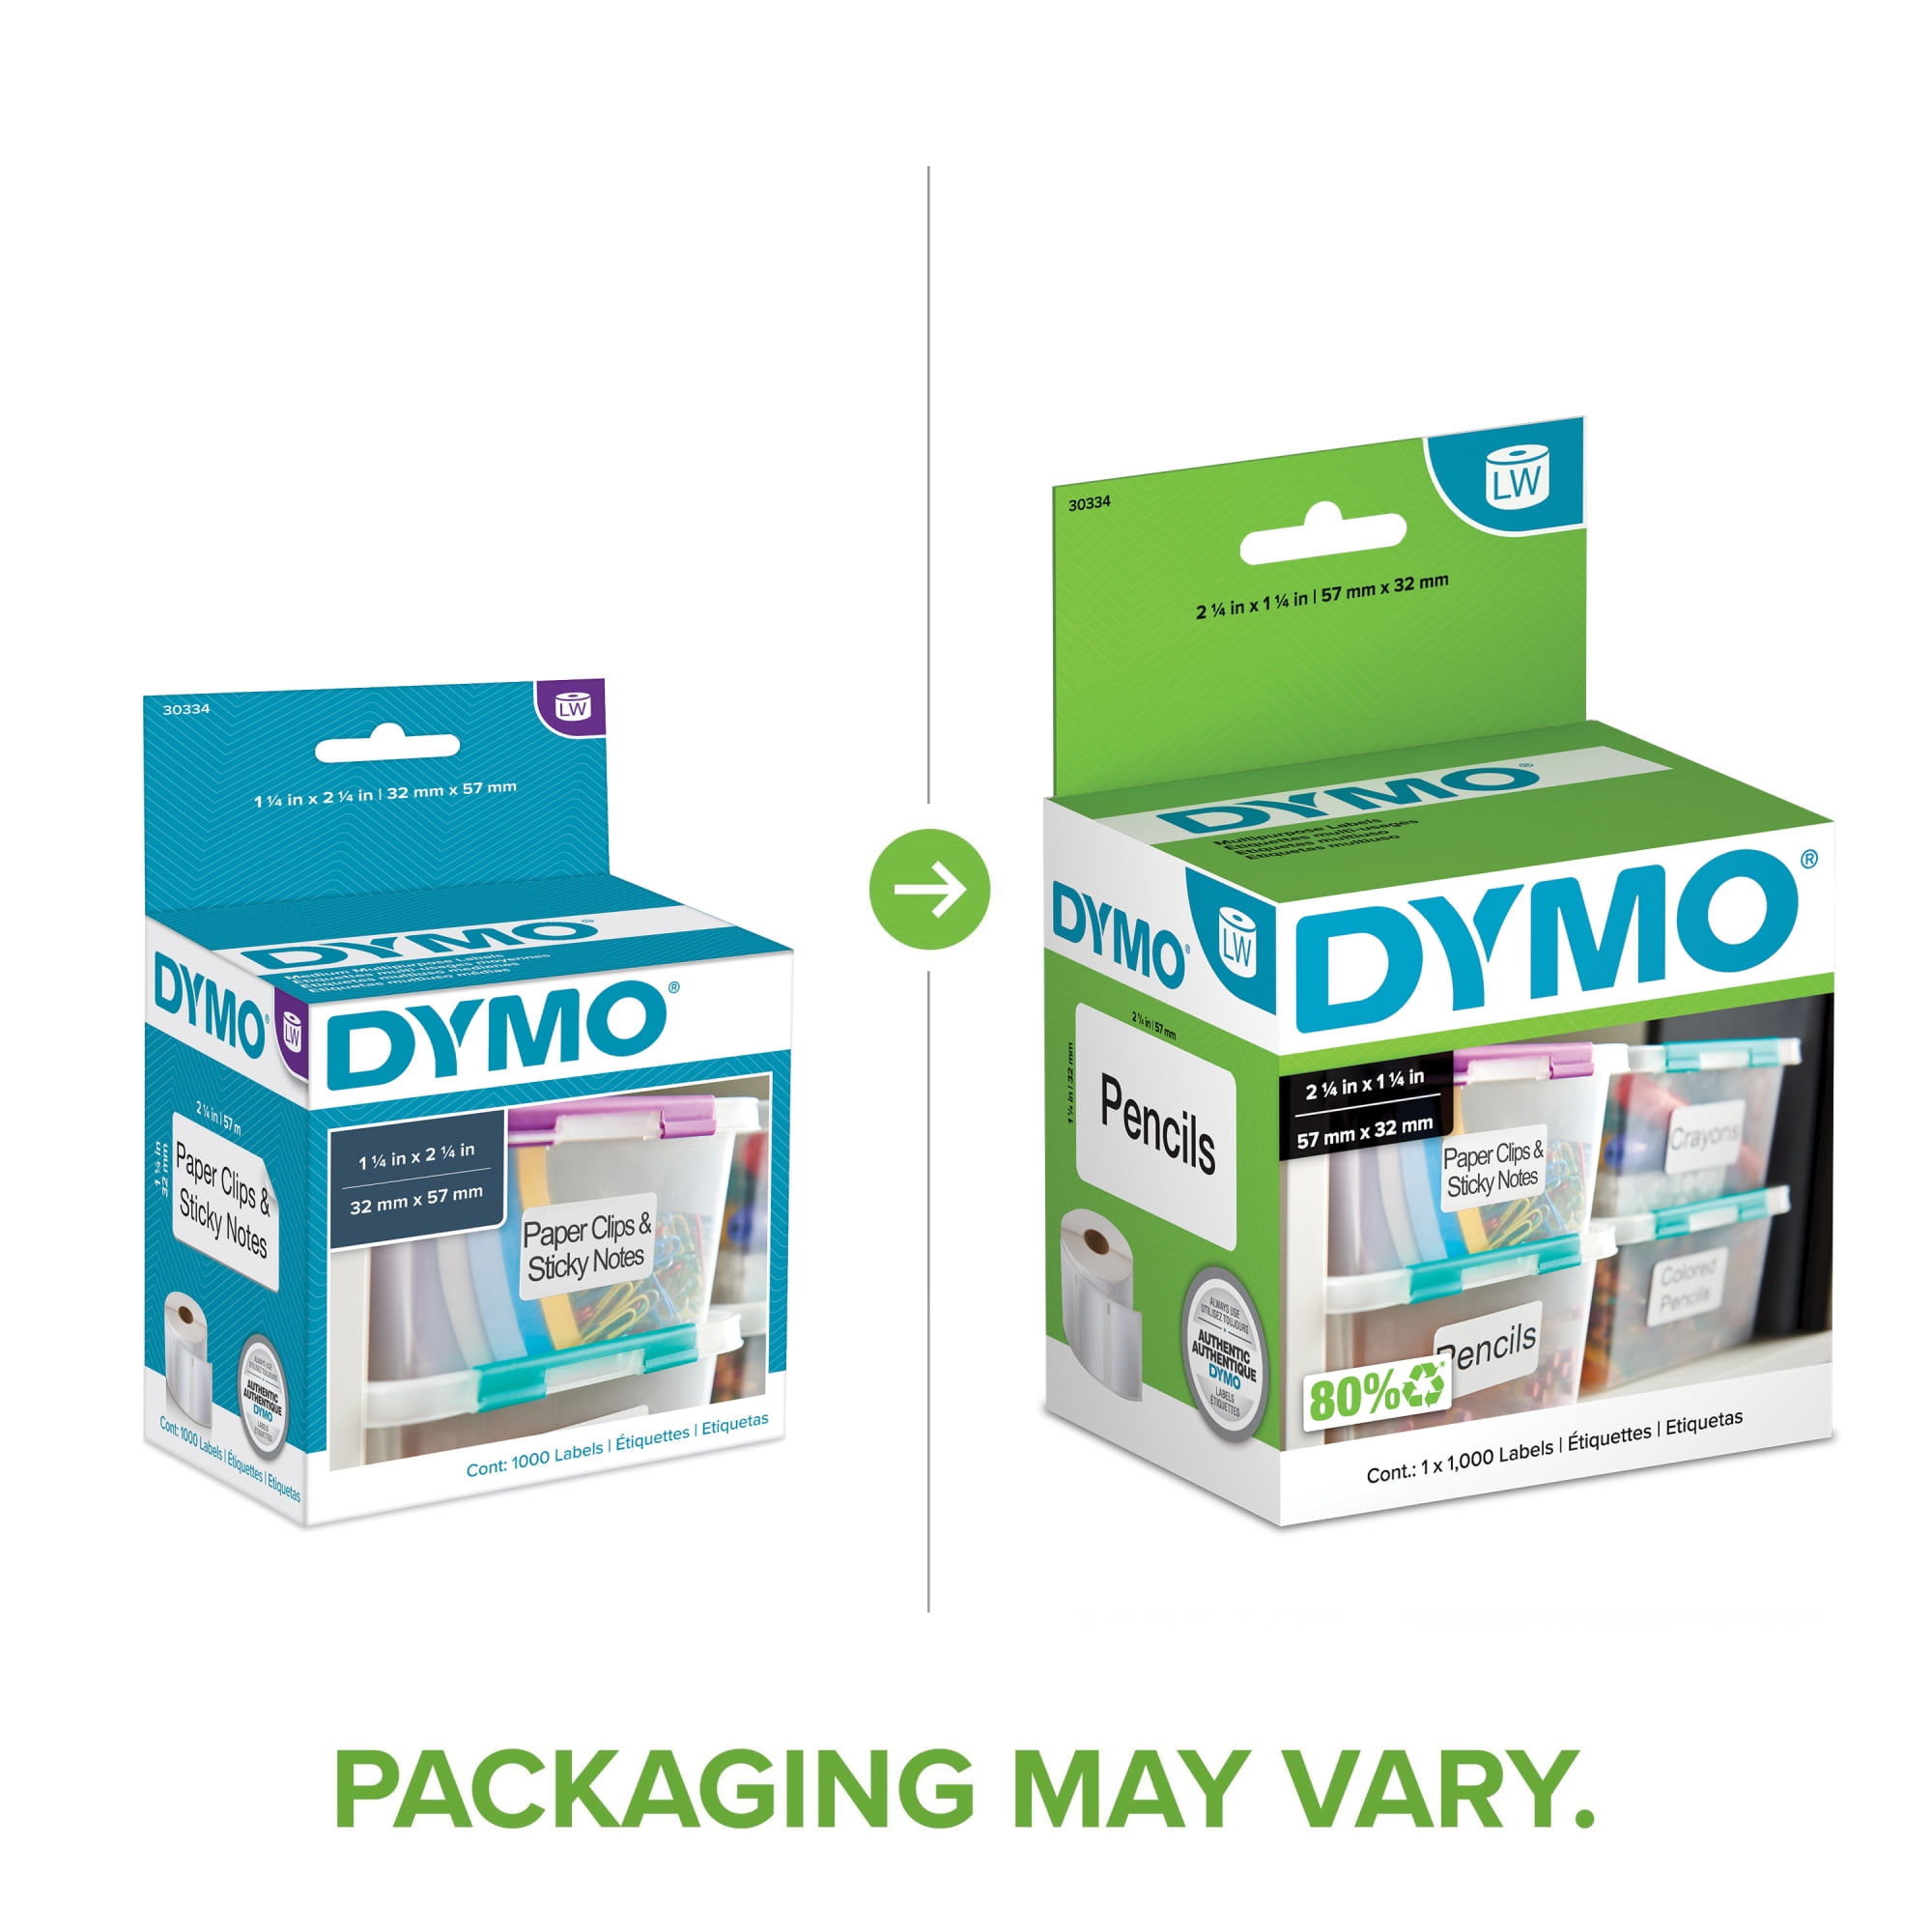 Dymo LV-30324 Compatible Labels - Free Shipping